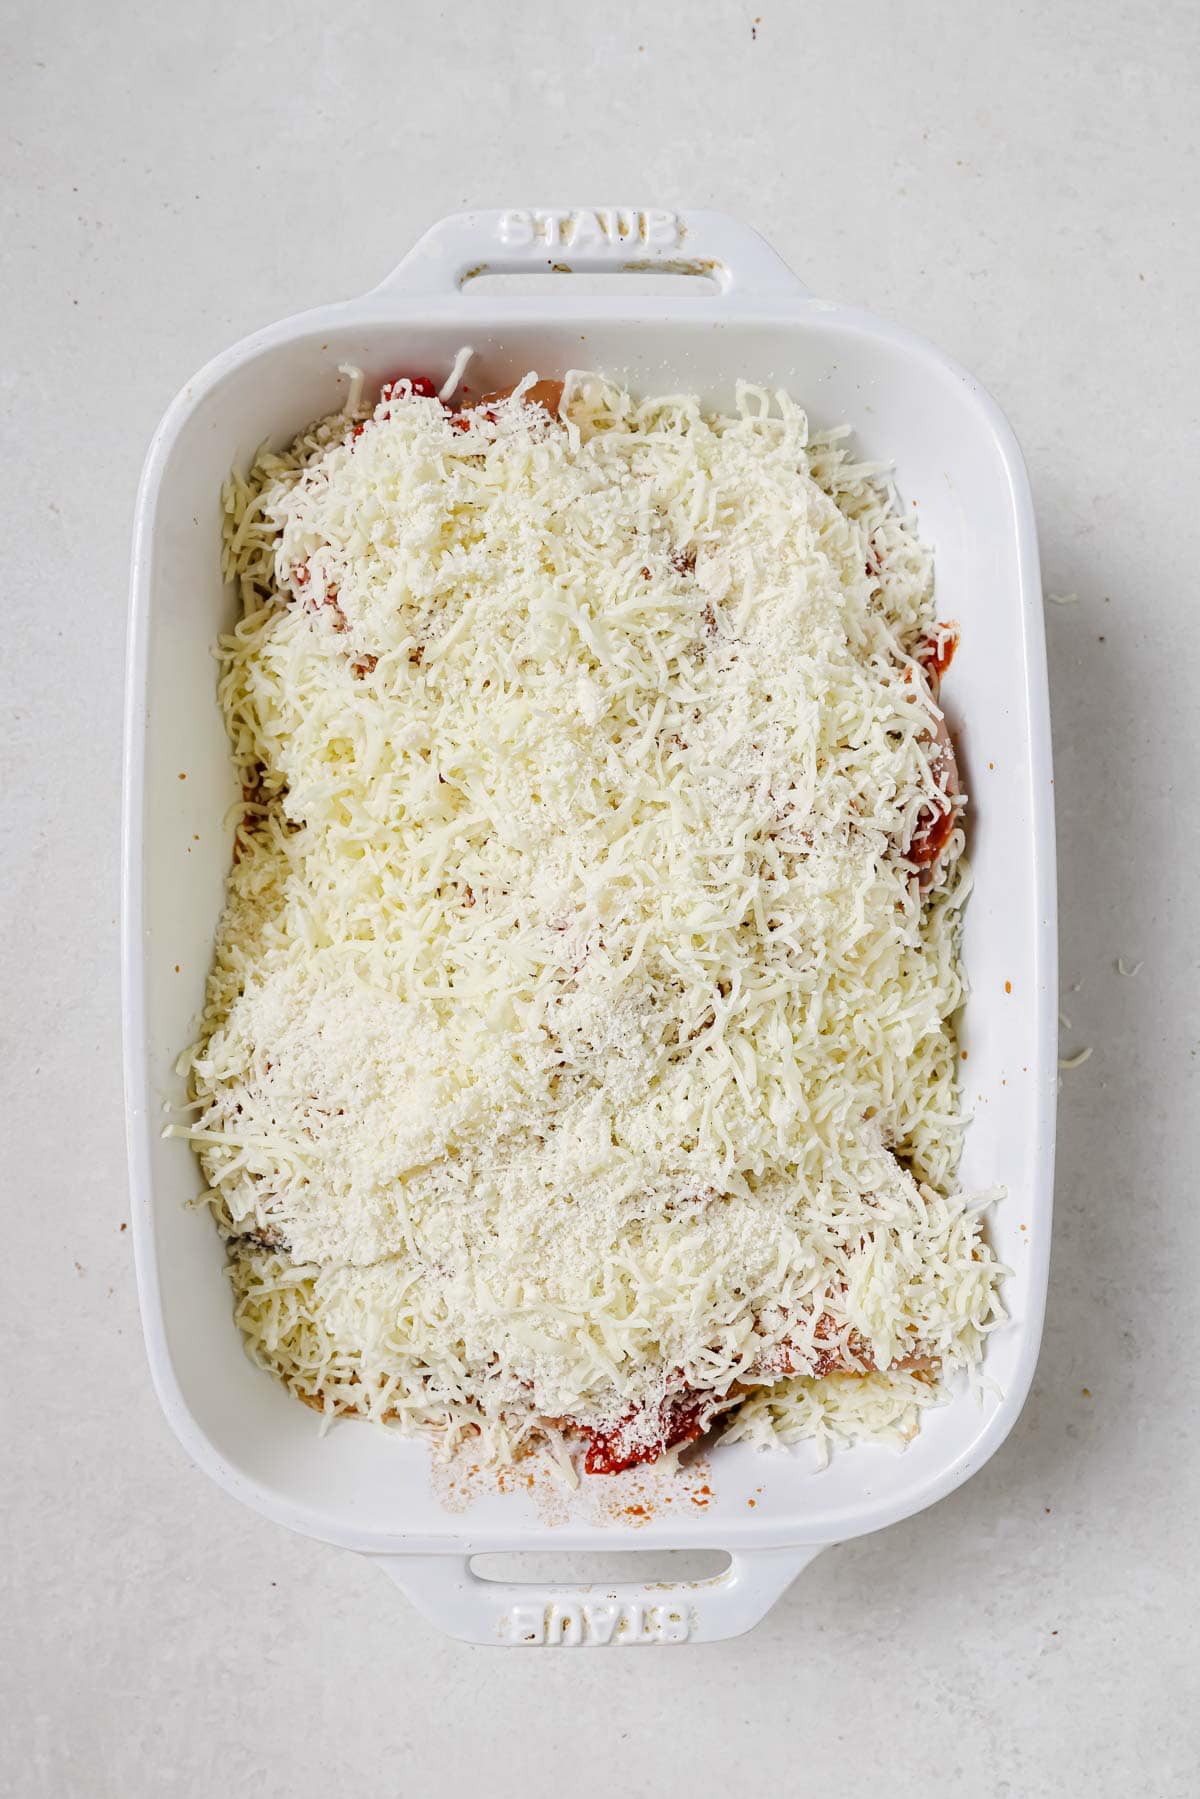 Mozzarella cheese grated on top of chicken sorrentino before baking.